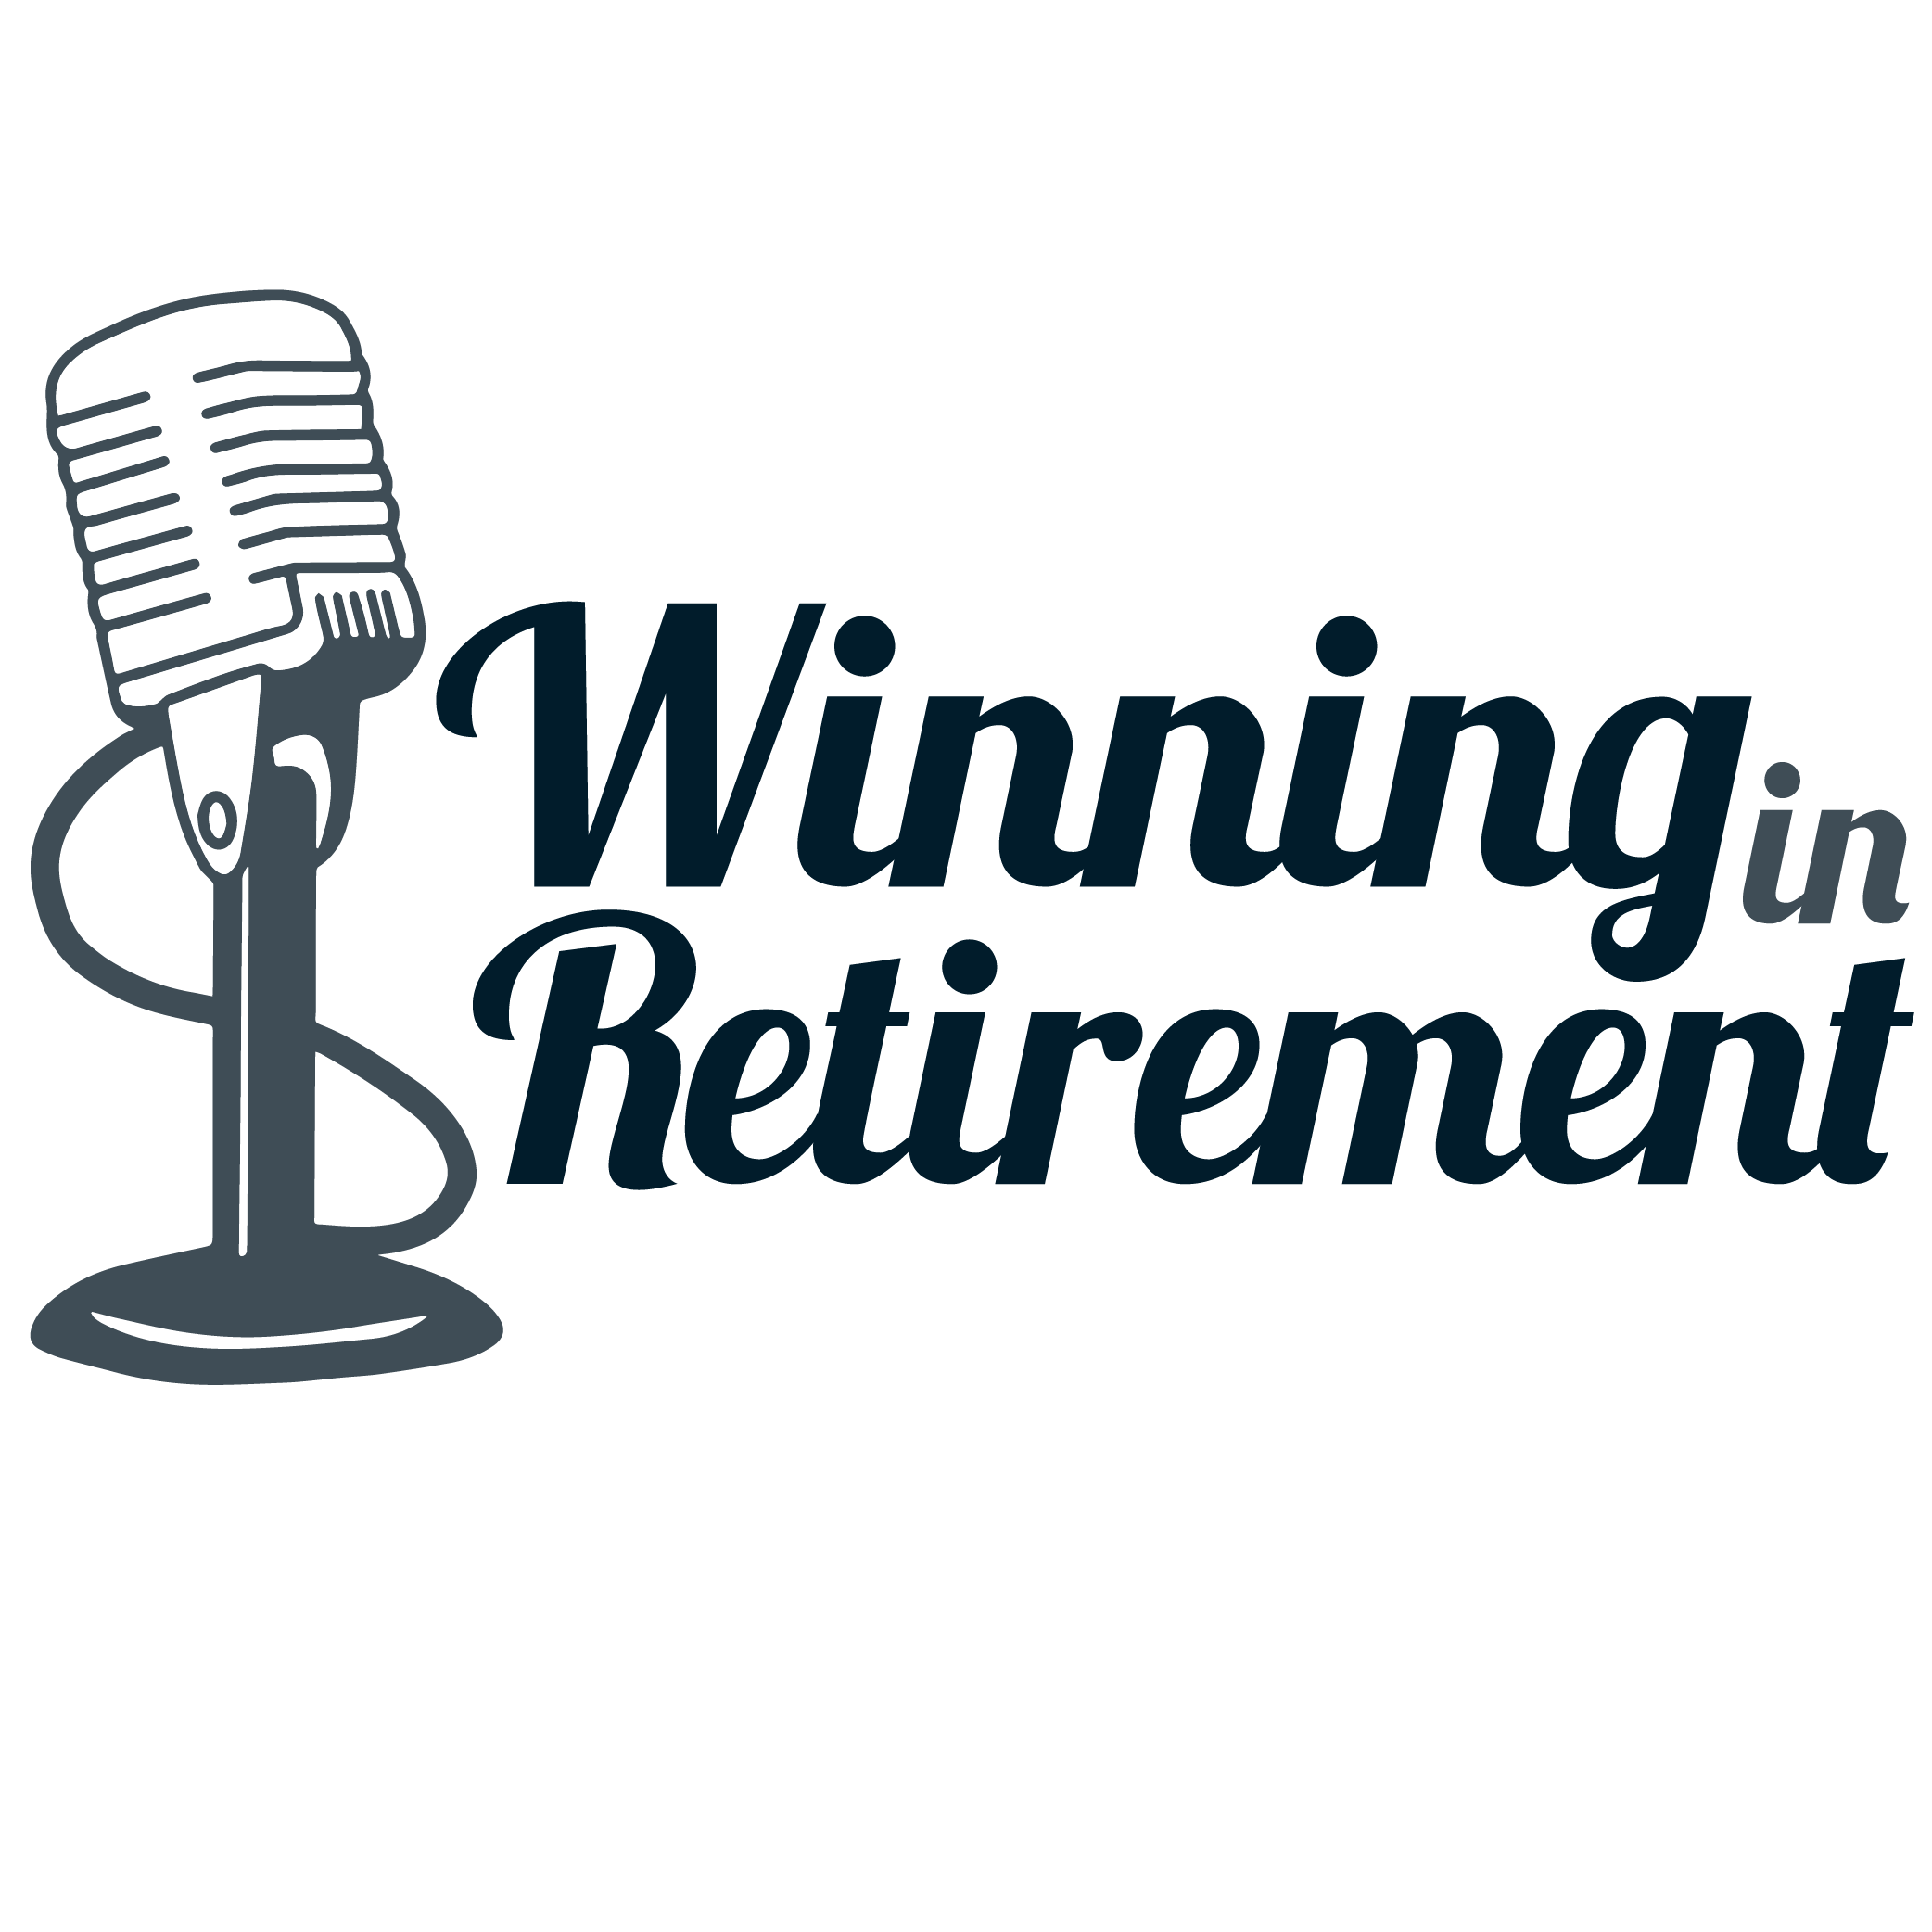 April 4, 2020 - How to Win in Retirement During Tough Times - Brian and Jeff